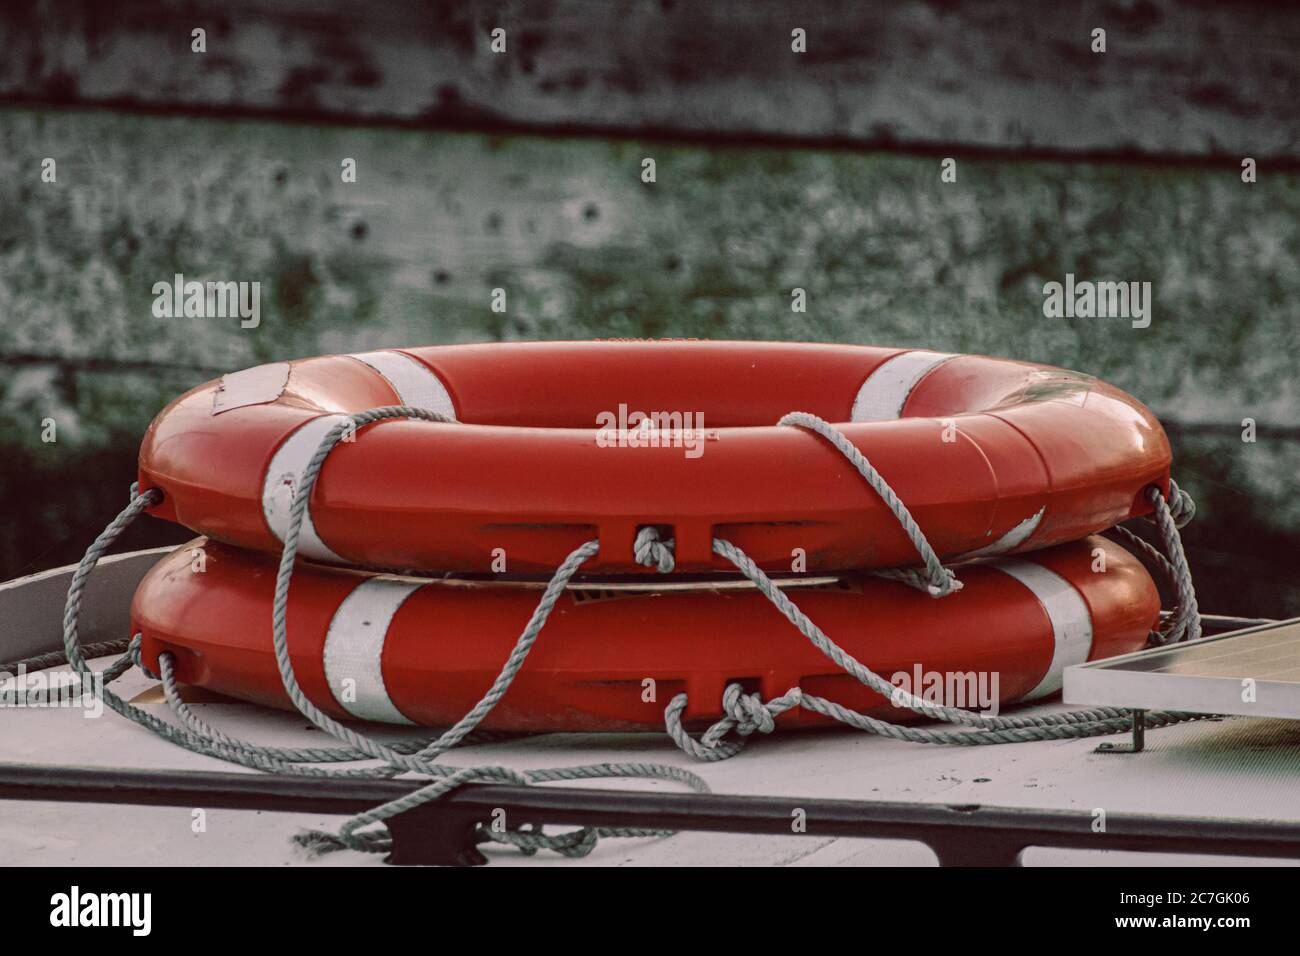 orange life rings stacked on the deck of a boat or yacht Stock Photo